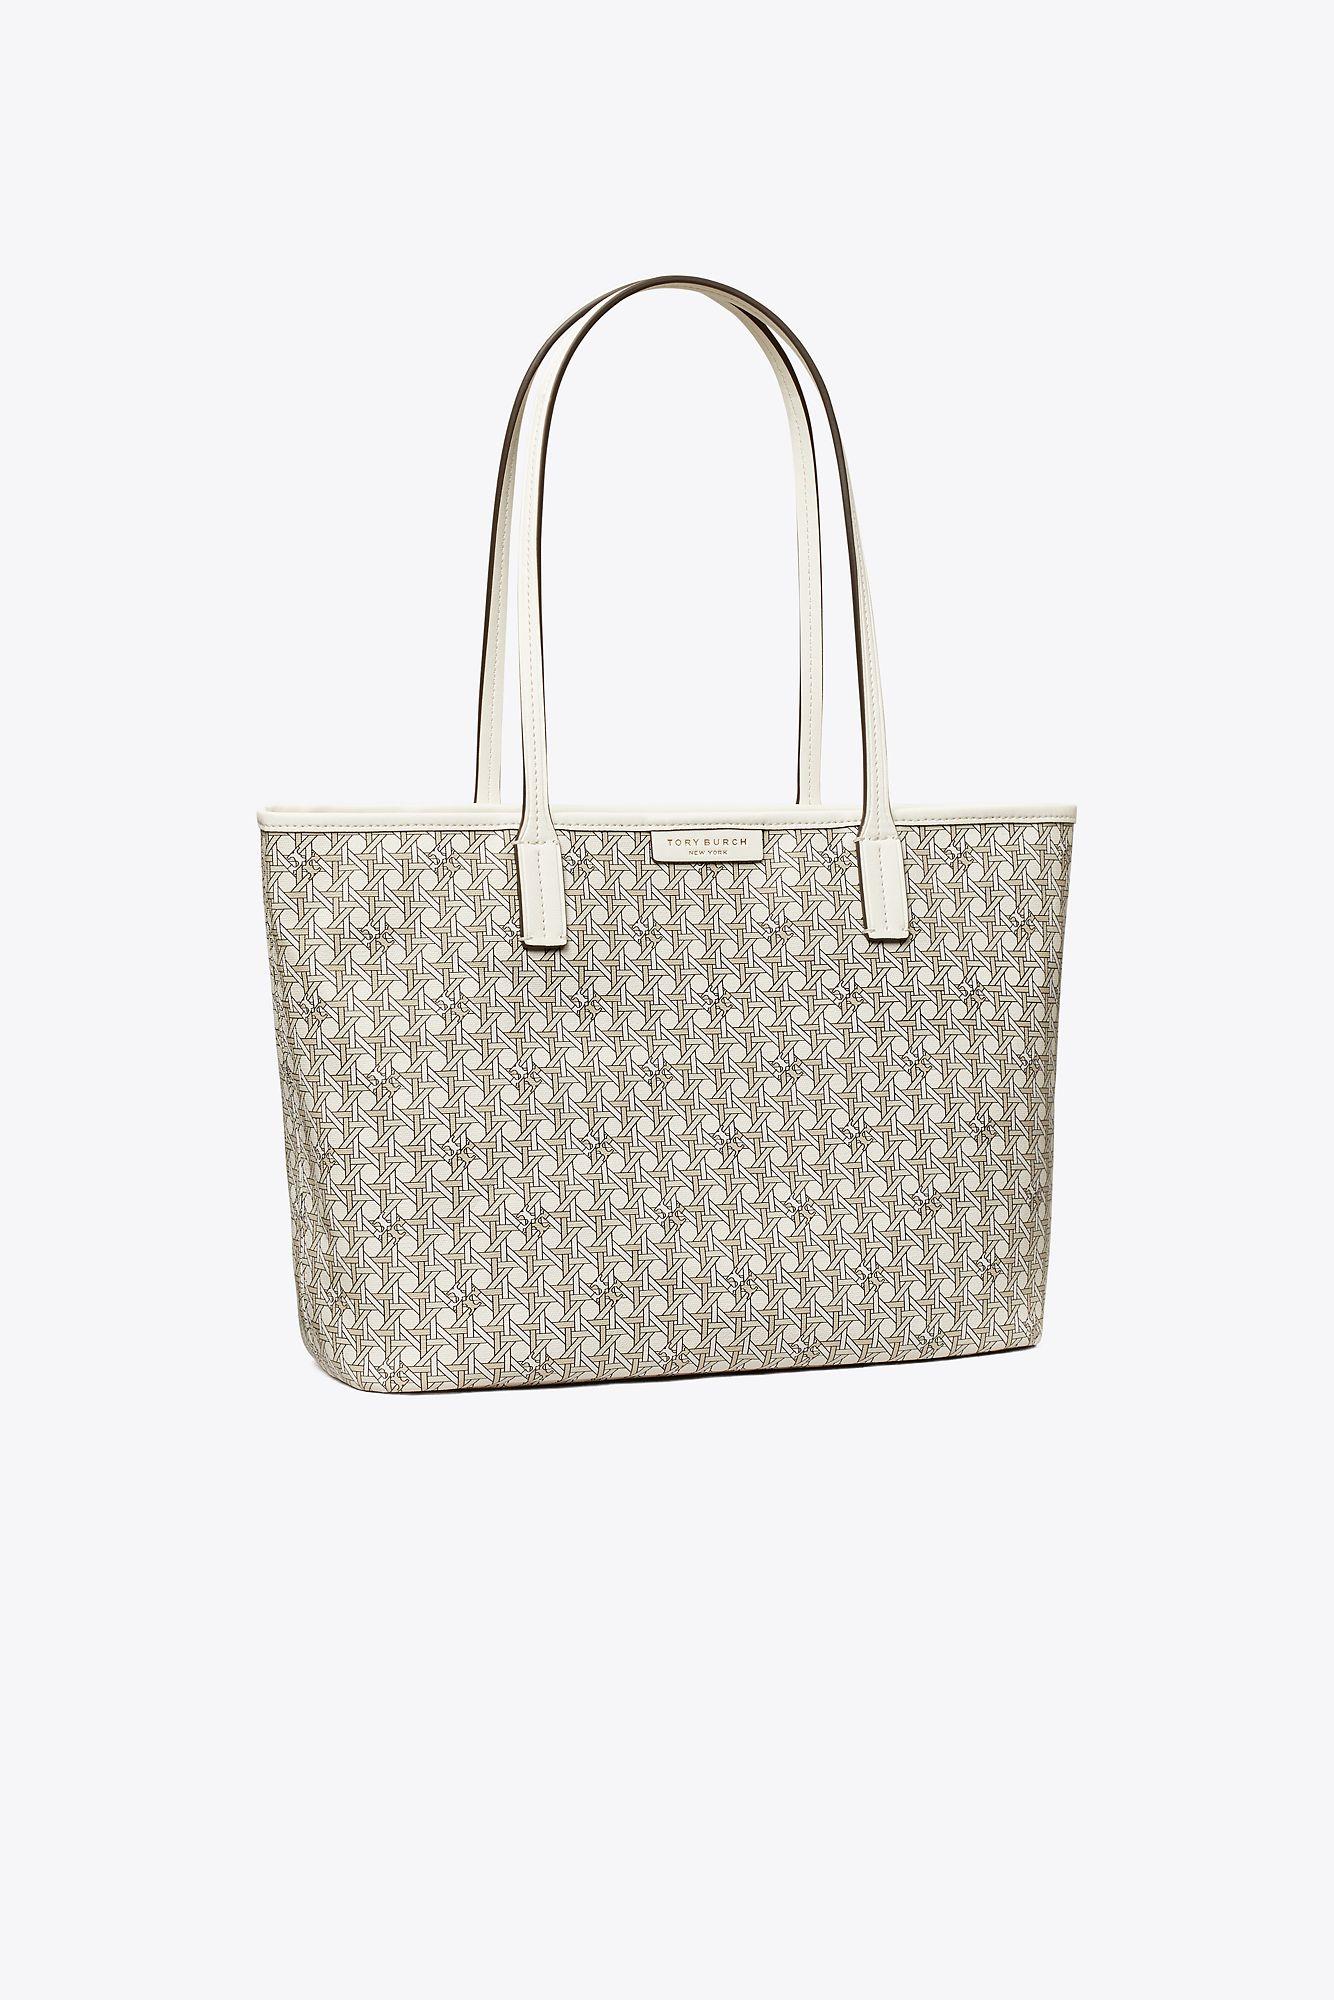 Tory Burch Small Ever-ready Zip Tote in White | Lyst